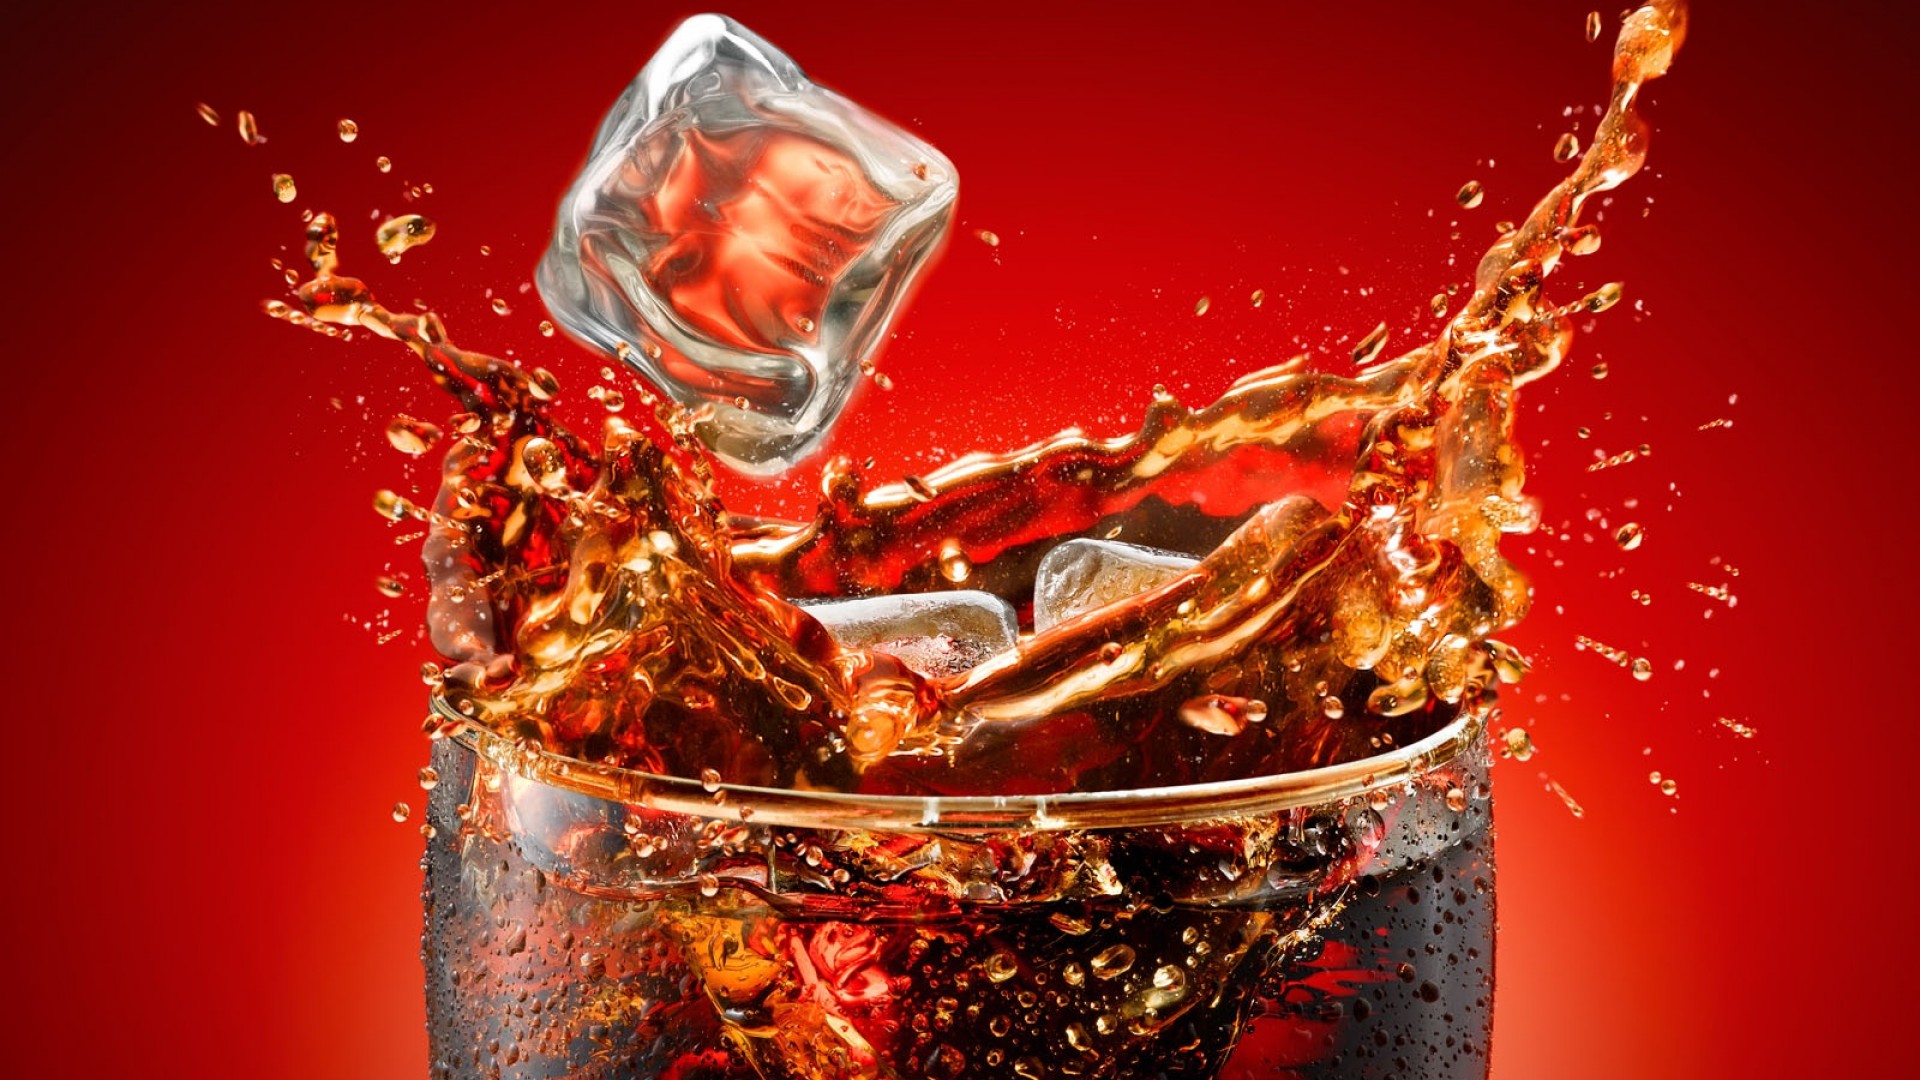 Artificial Sweeteners and Diet Sodas – do they Help or Hinder Fat Loss?